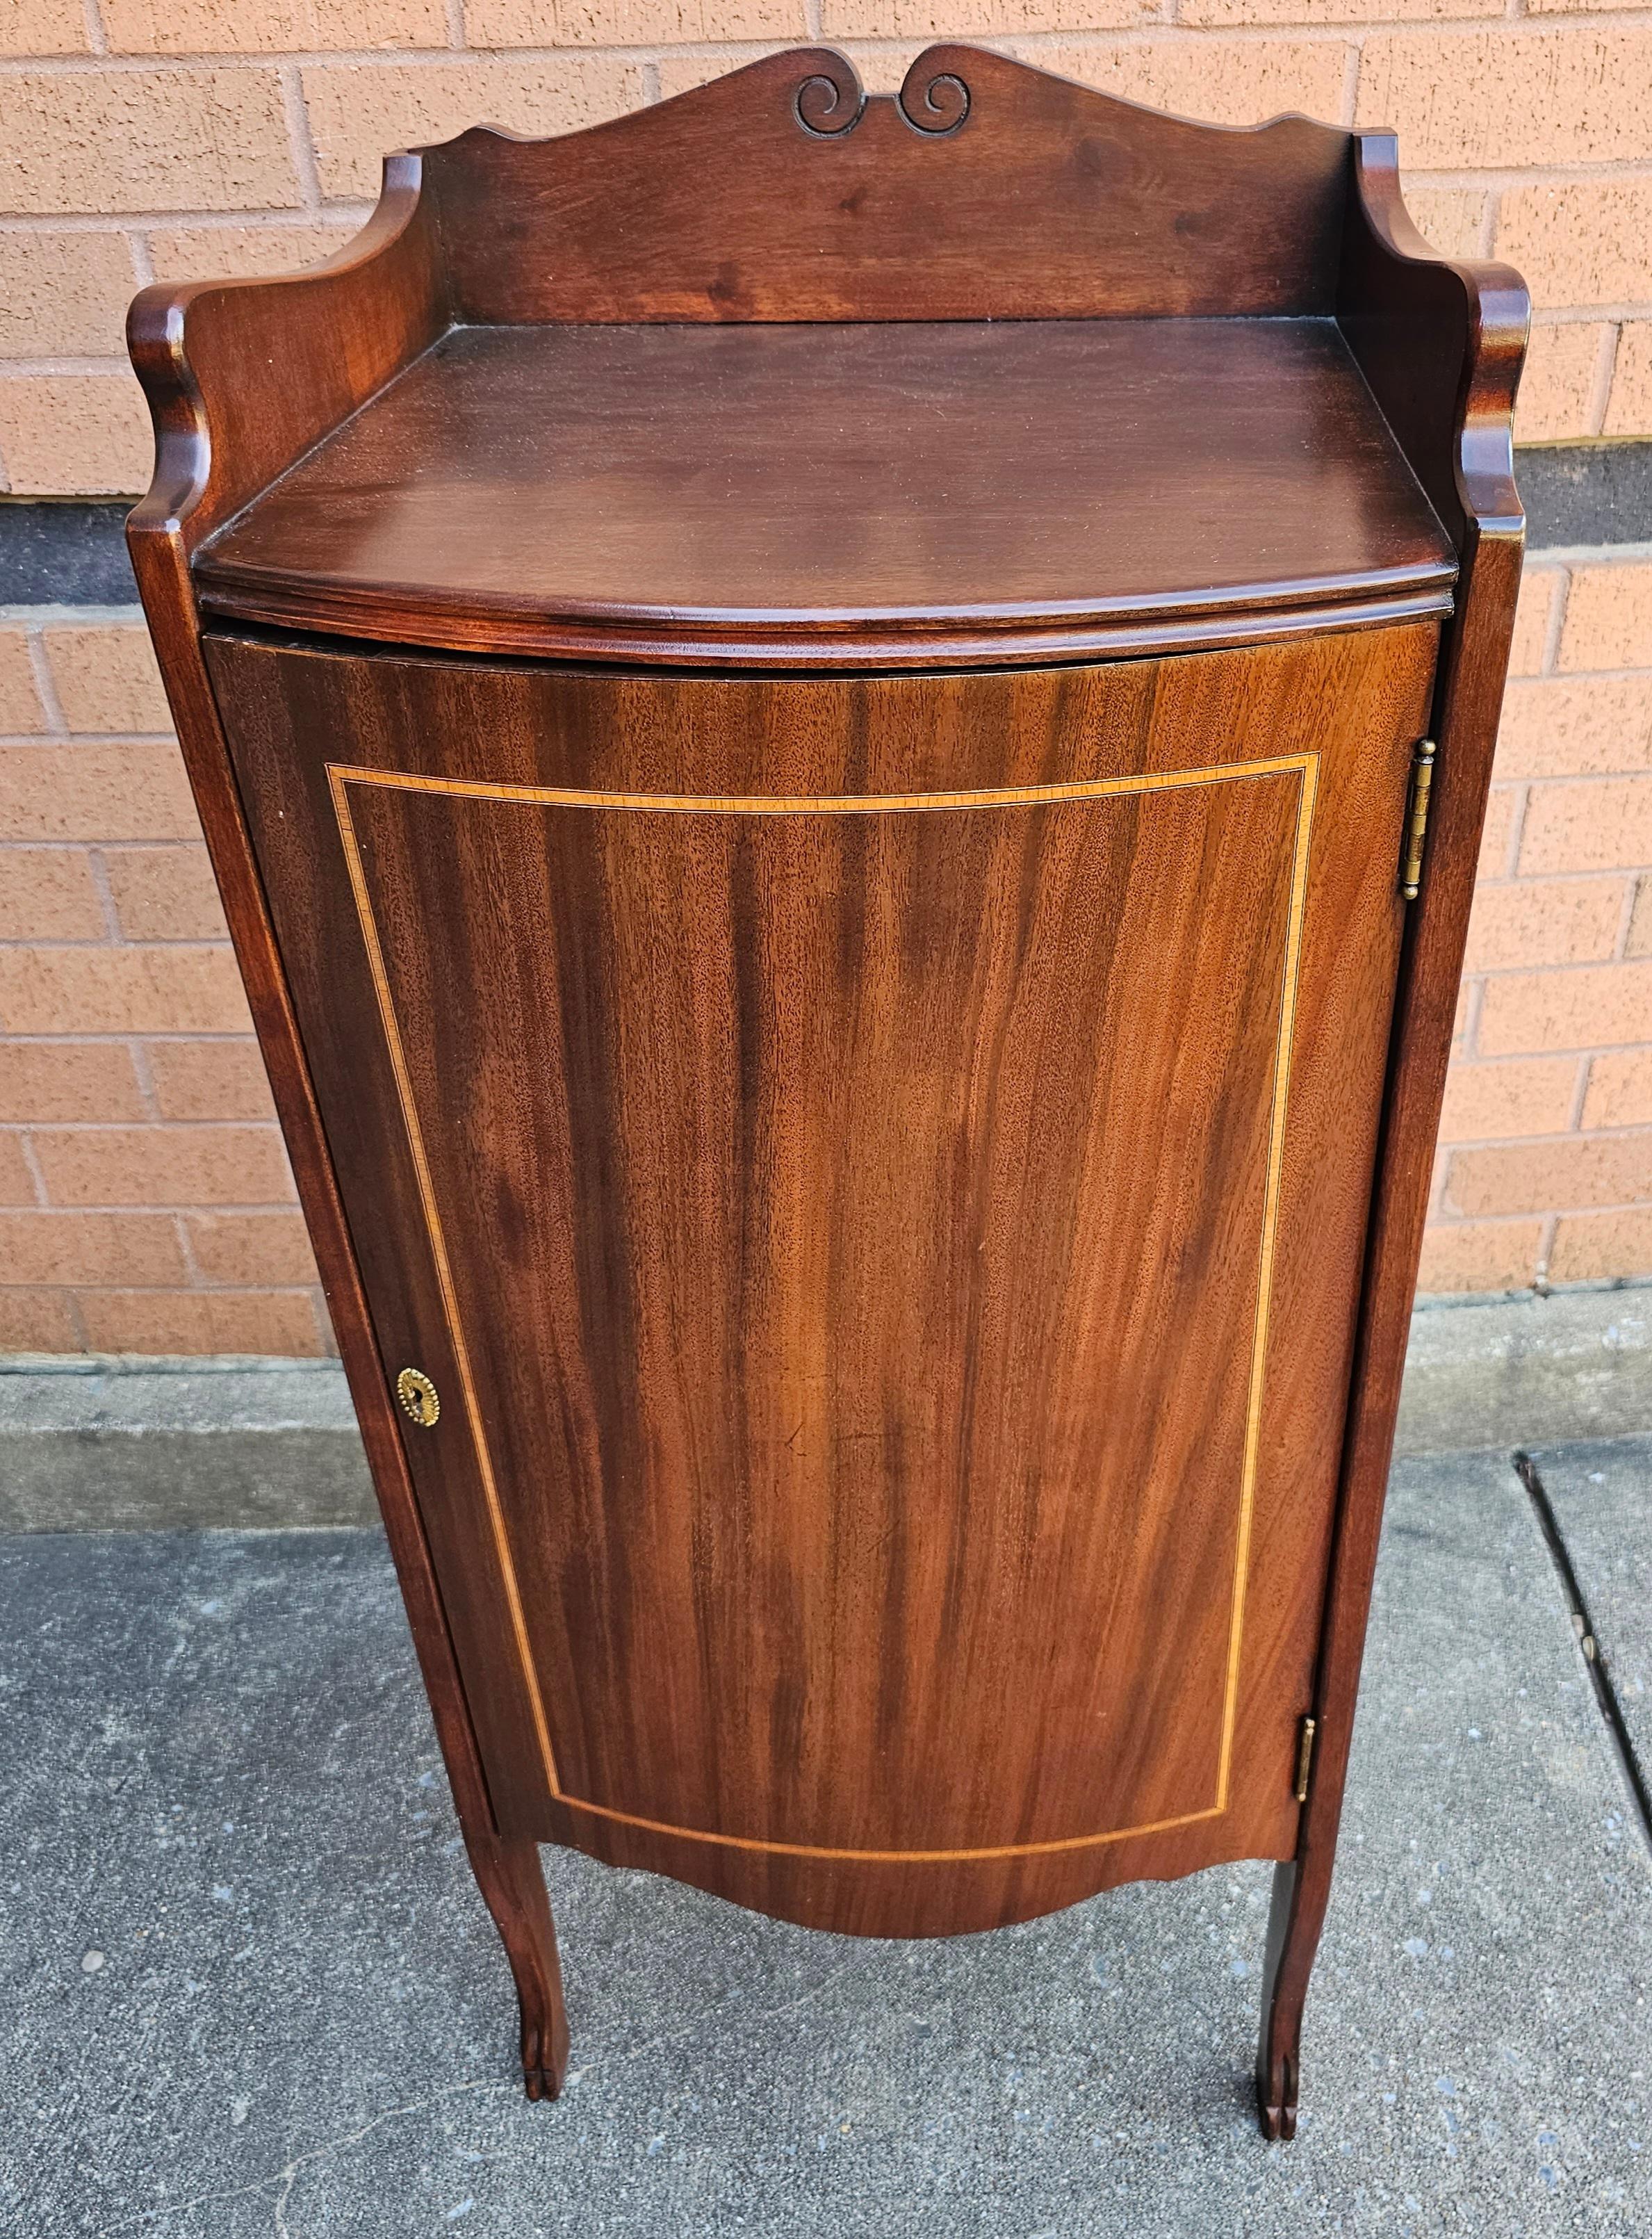 1930s Refinished Edwardian Mahogany and Satinwood Inlaid Sheet Music Cabinet. Comes with two adjustable height shelves. Unsed in mrdern days as side cabinet for various purposes.
Totally refinished and in great antique condition. Measures 18